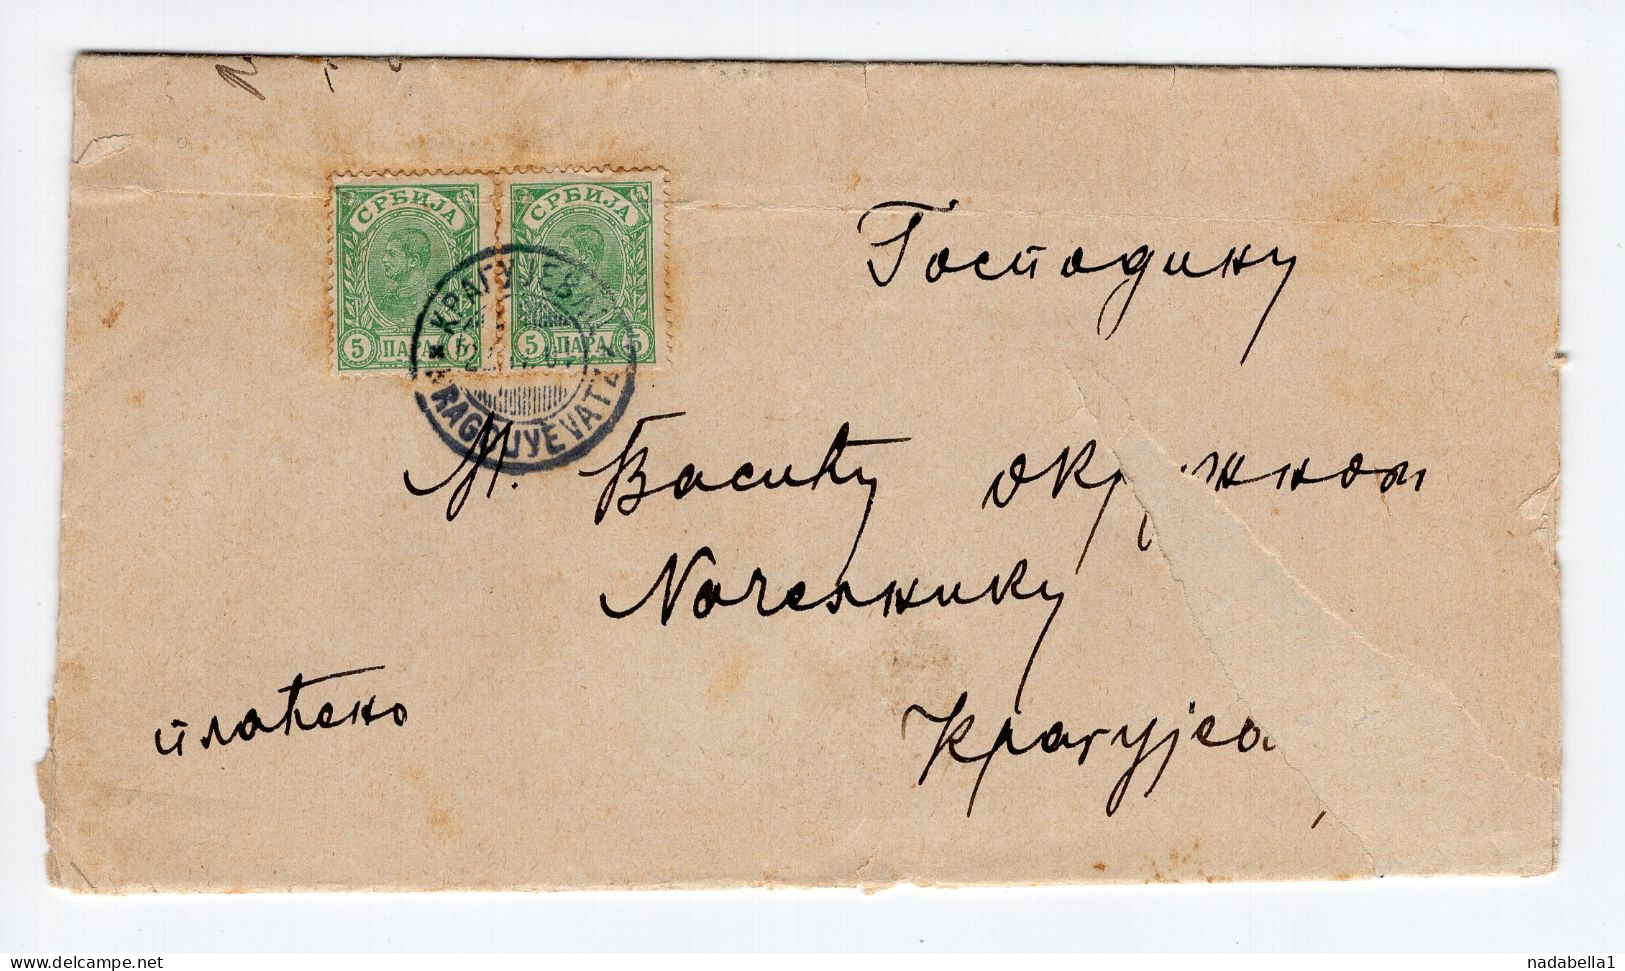 1901. SERBIA,KRAGUJEVAC,LOCAL RATE 2 X 5 PARA FOR DOUBLE WEIGHT,LETTER COVER 21.04.1901 TRNAVA - Serbia